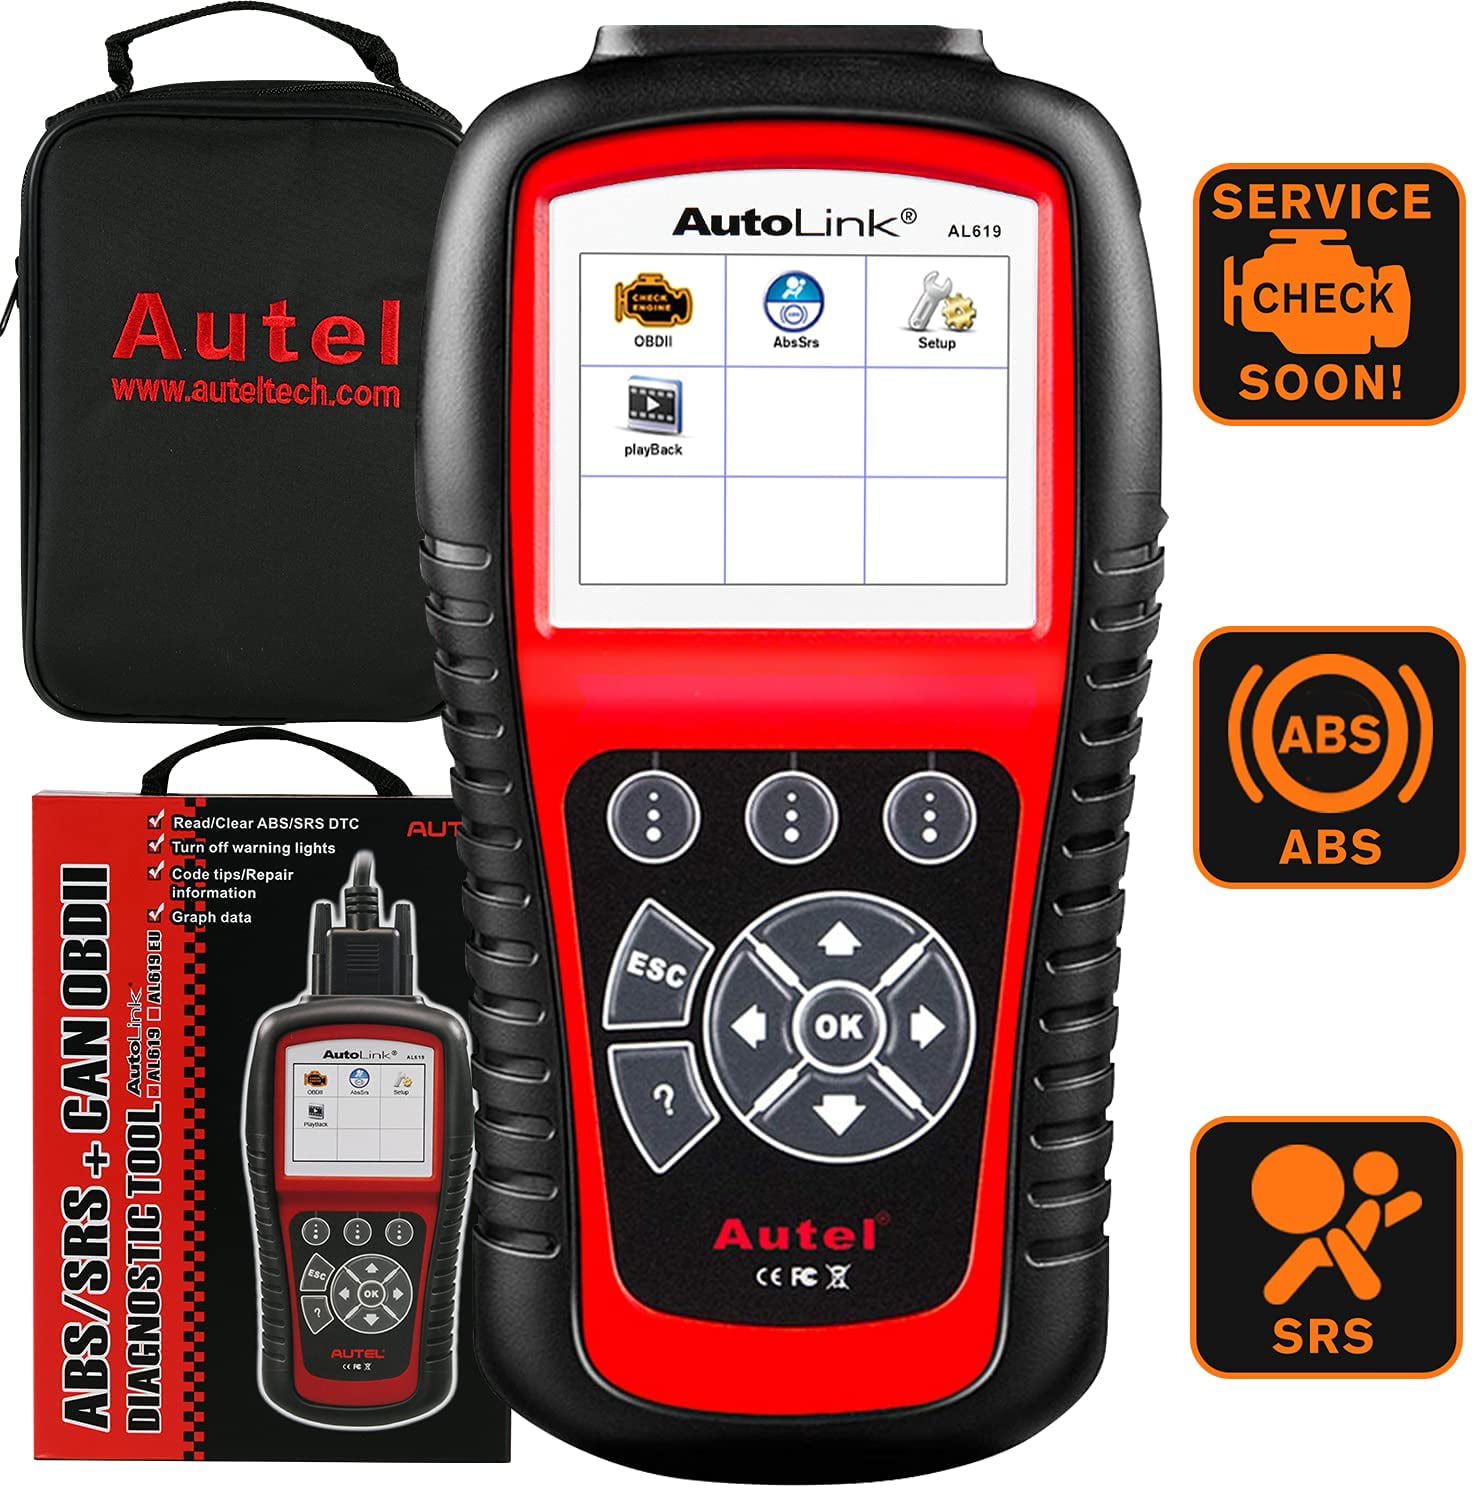 Autel ML619 OBD2 Auto Scanner Code Reader Car ABS Airbag Diagnostic Scan Tool 